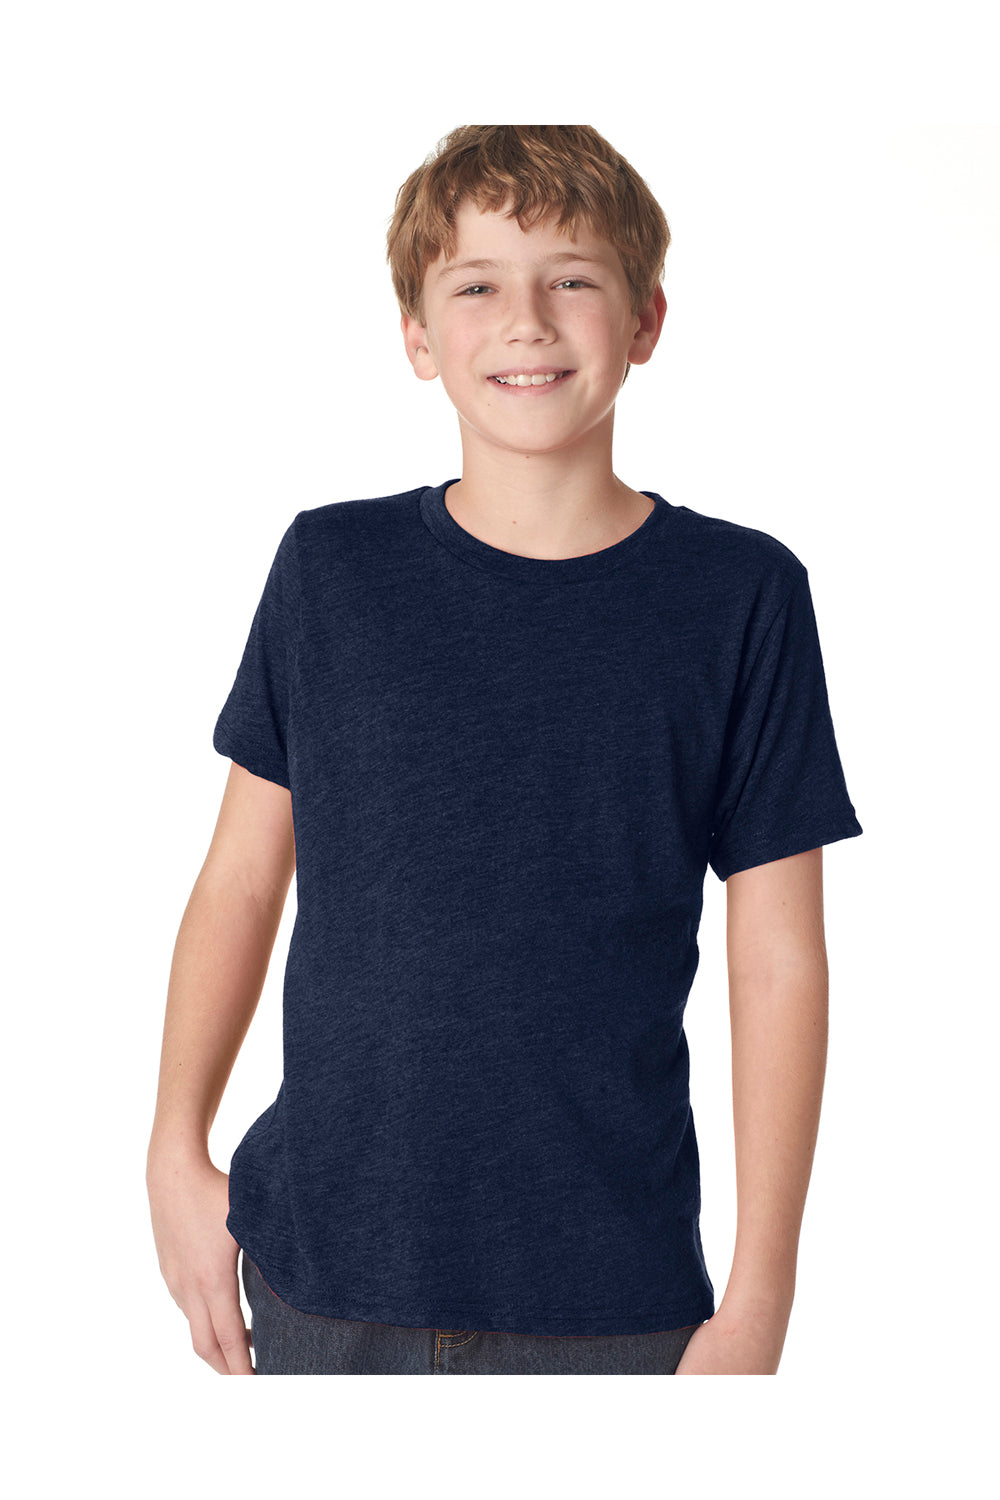 Next Level N6310 Youth Jersey Short Sleeve Crewneck T-Shirt Navy Blue Front